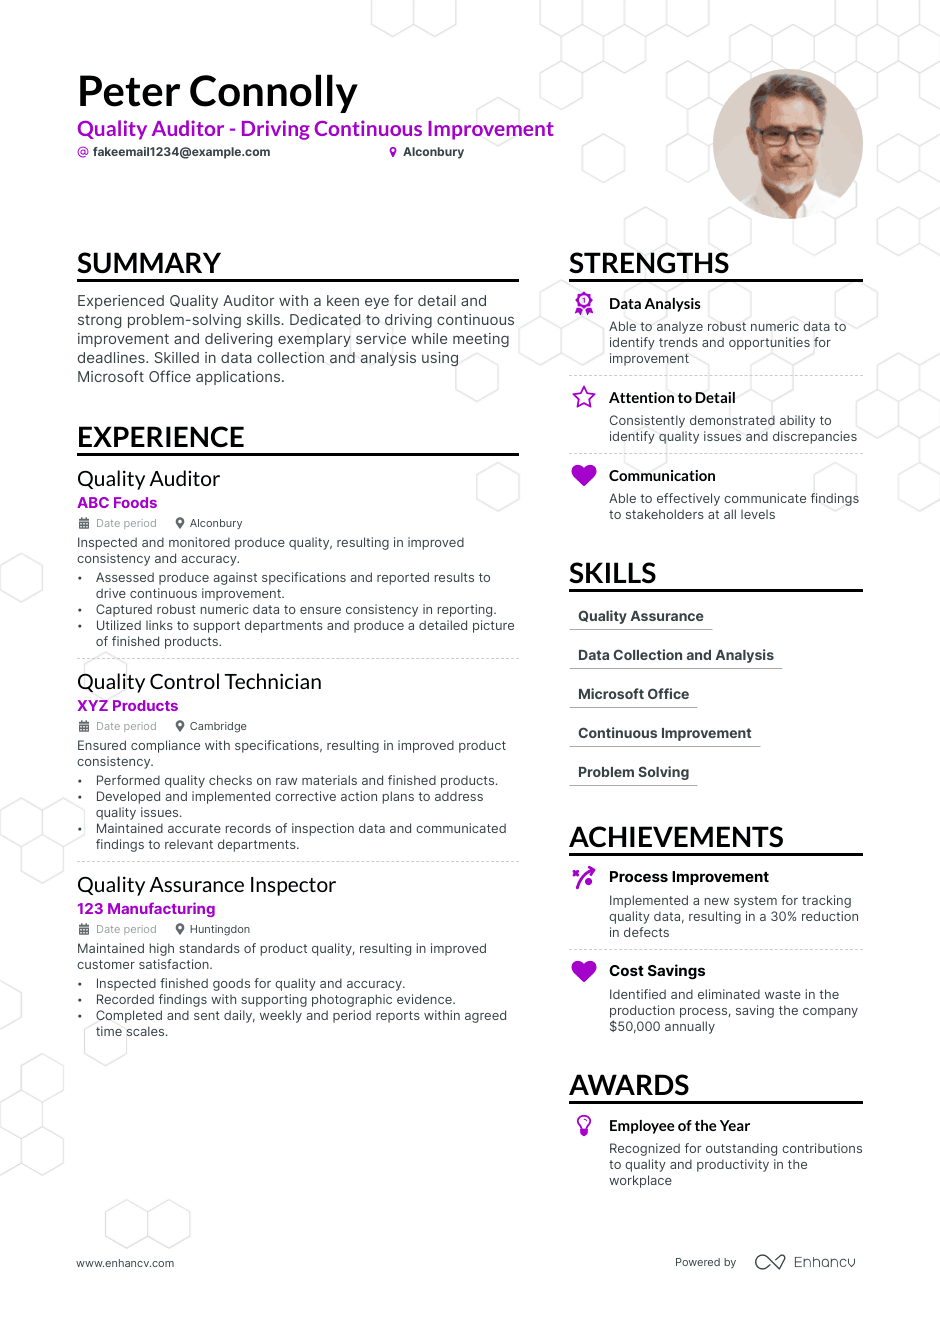 Quality Auditor resume example